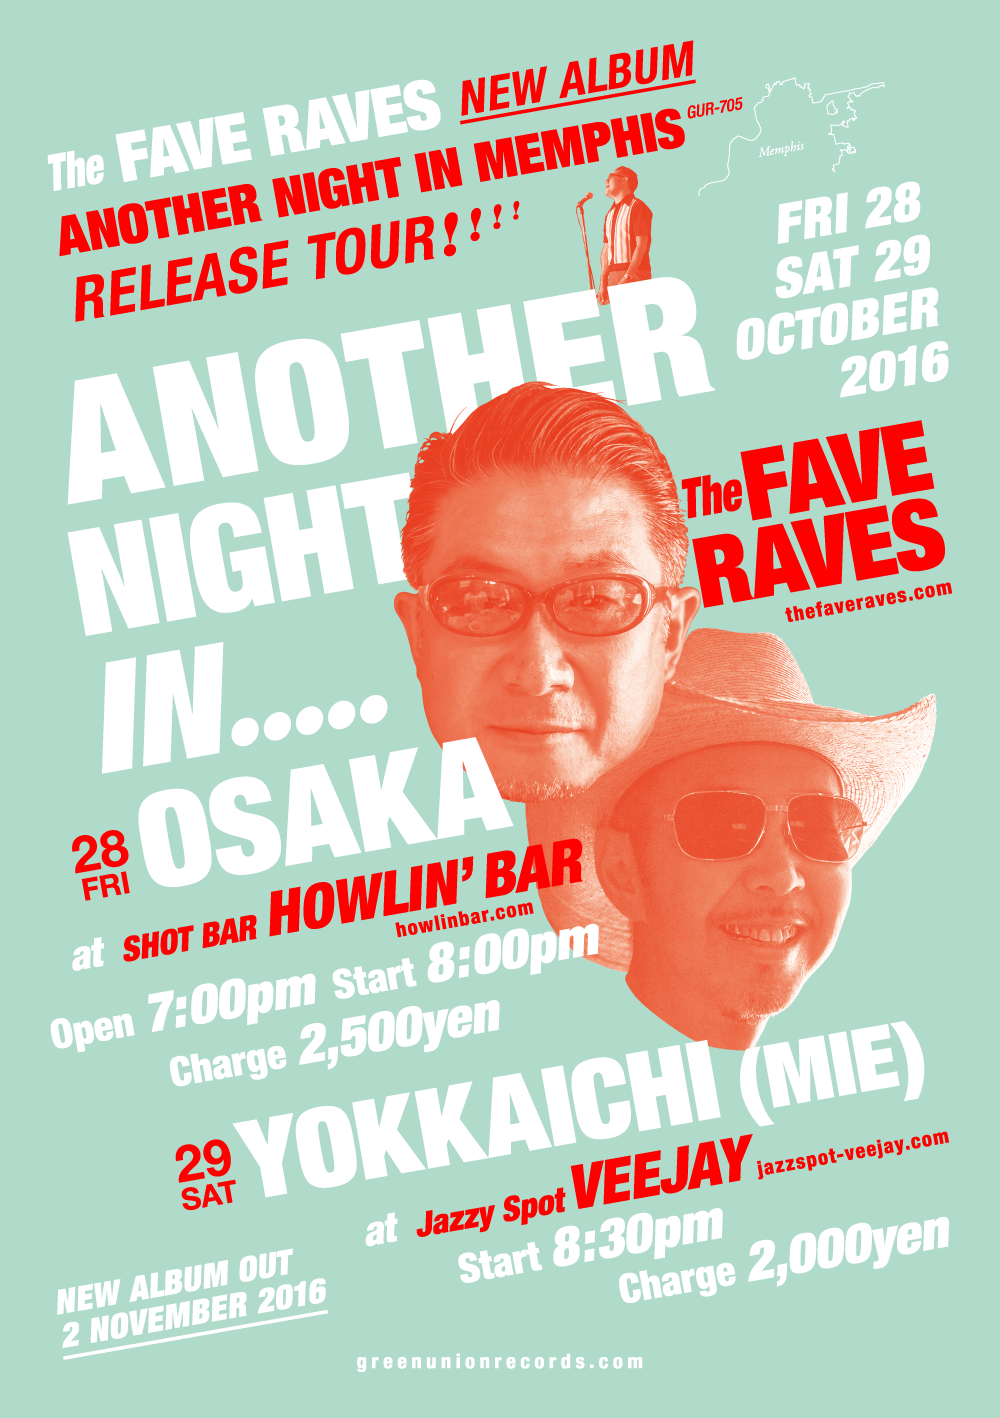 The Fave Raves 関西リリースツアー決定！